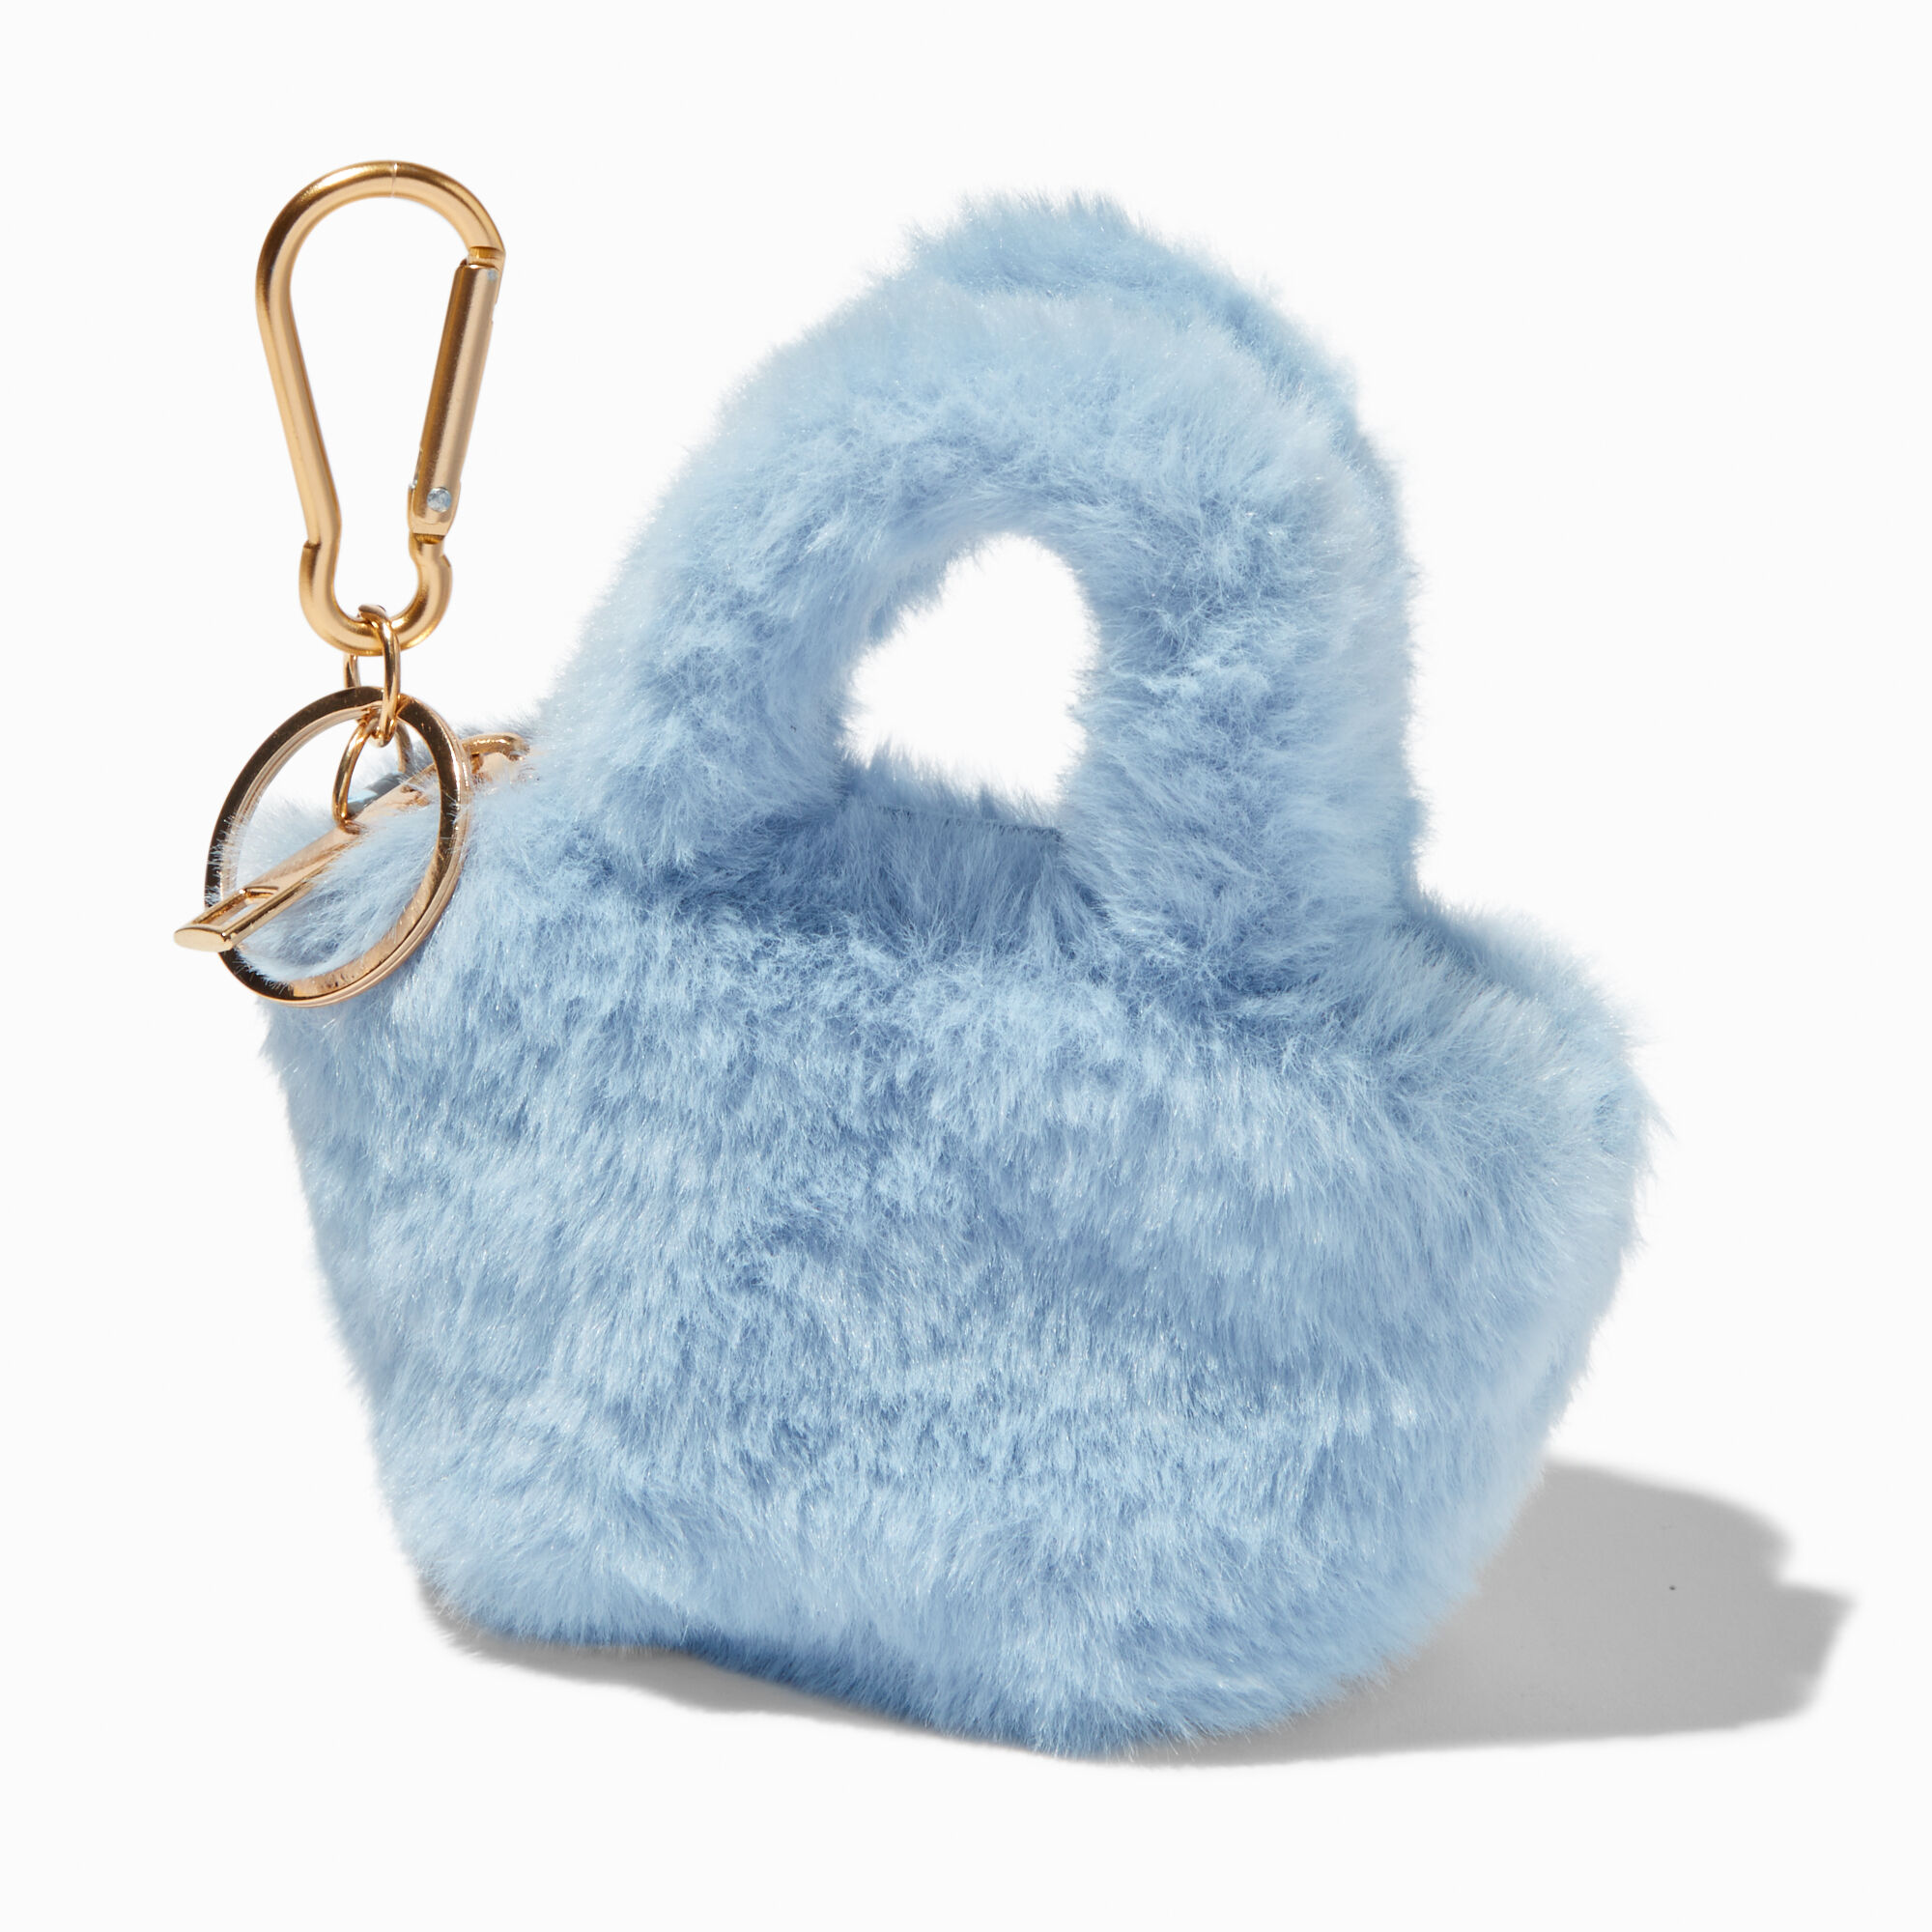 View Claires Furry Mini Tote Bag Keyring Blue information